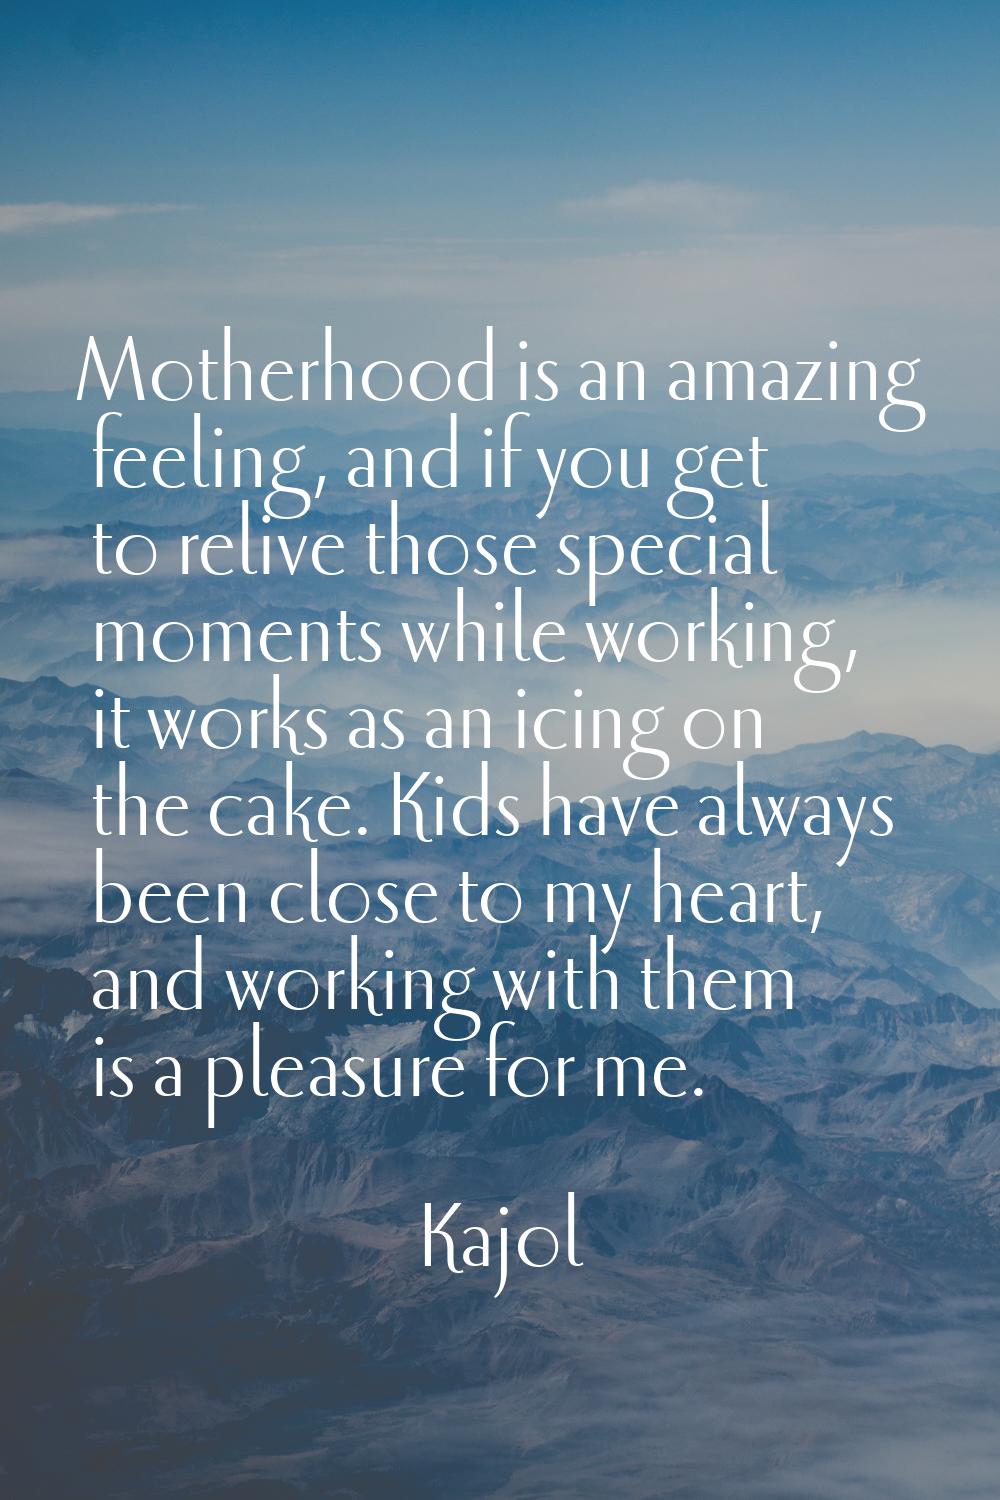 Motherhood is an amazing feeling, and if you get to relive those special moments while working, it 